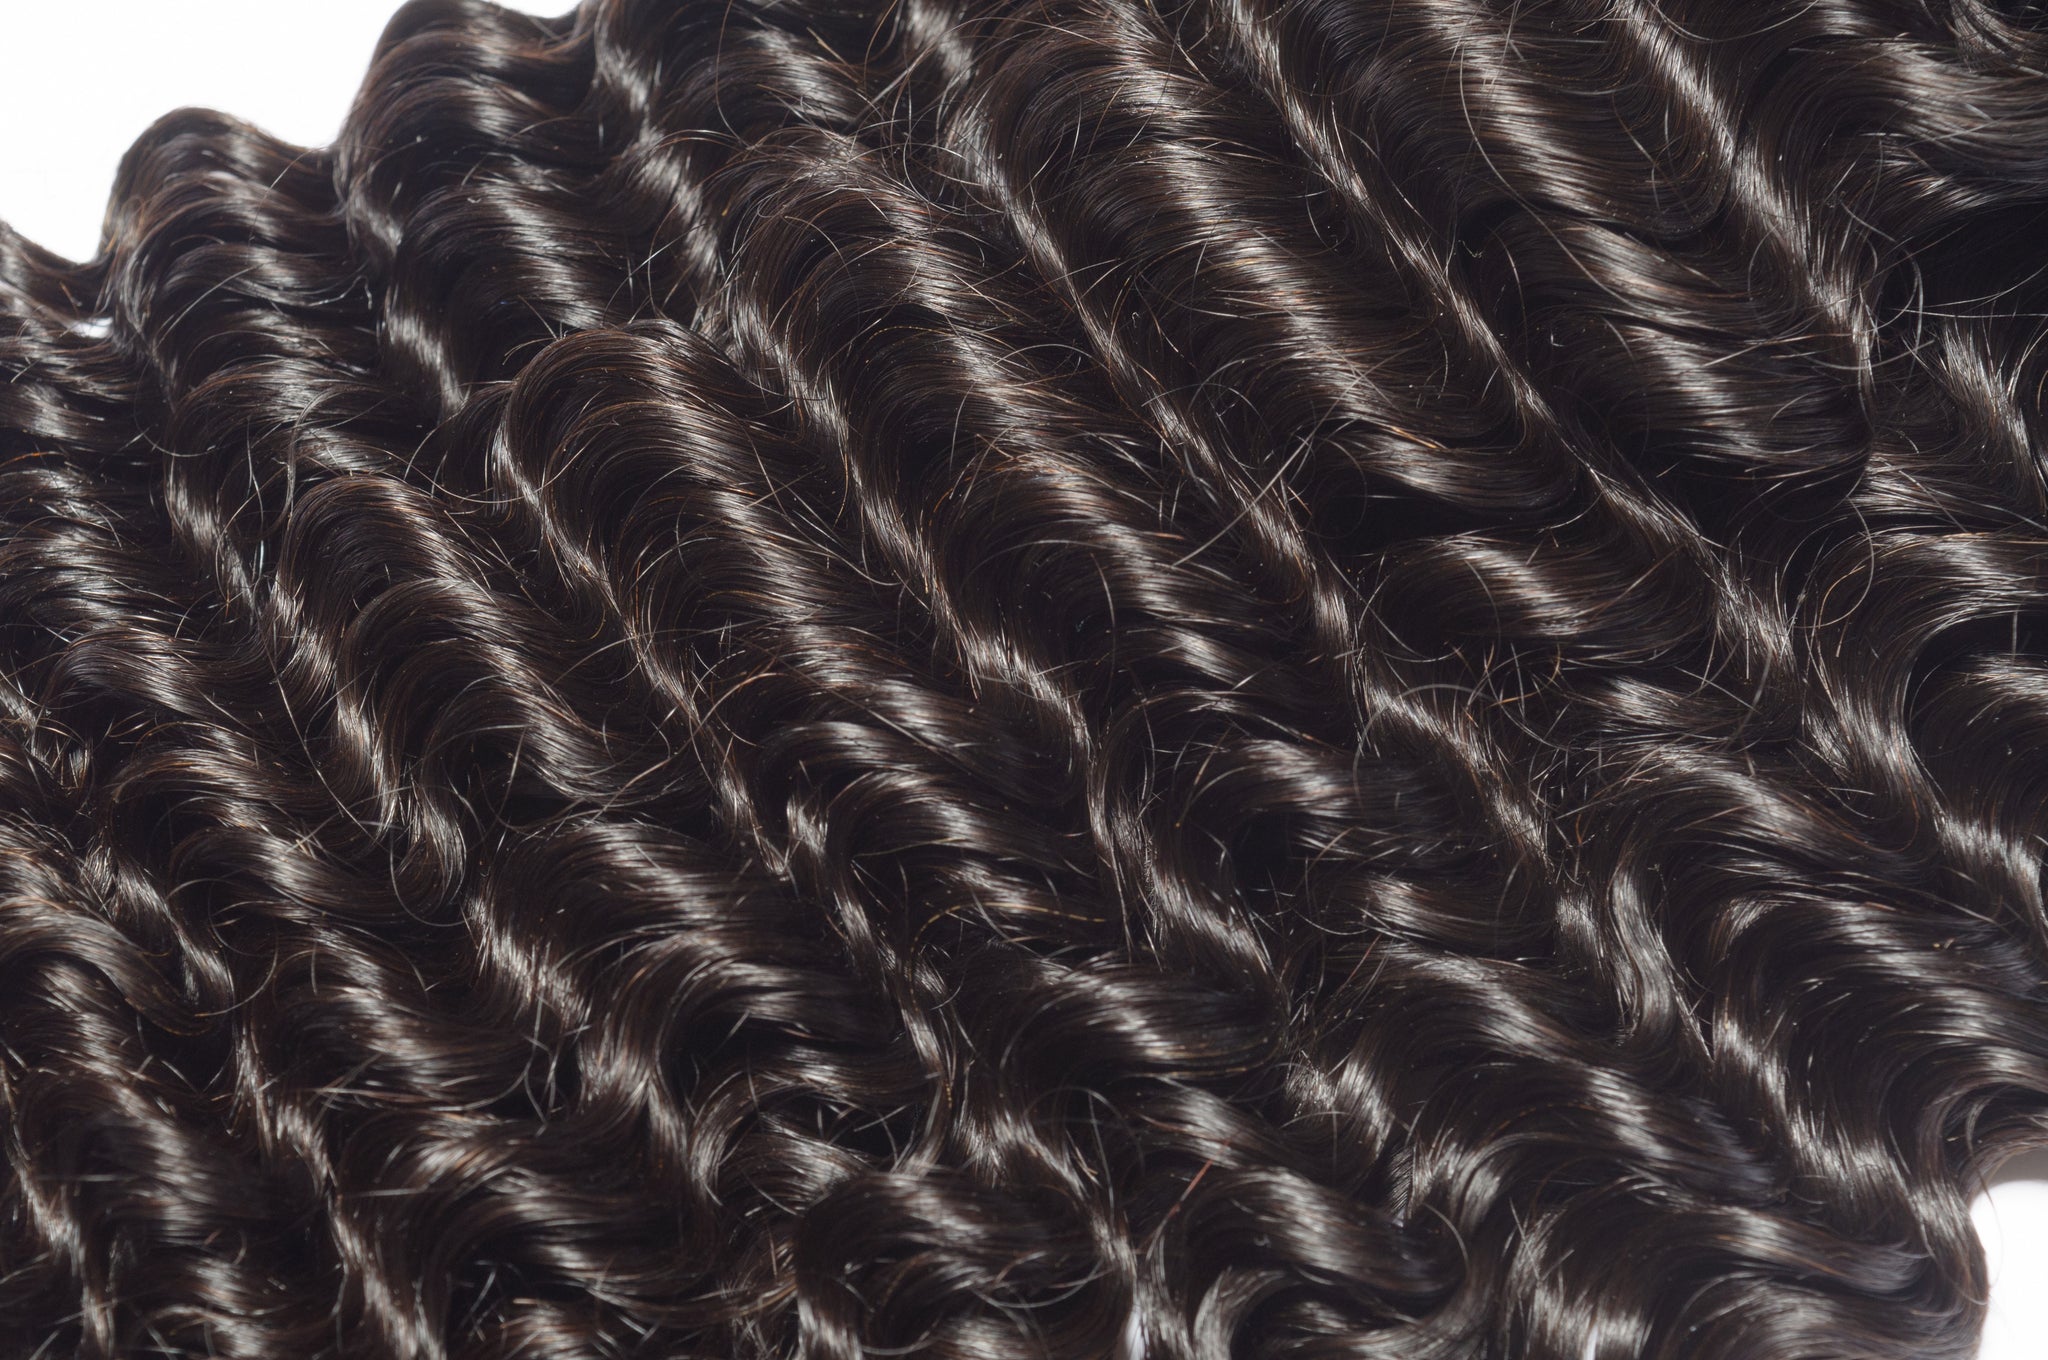 Swiss Lace Closure Curly Wave 4X4 - Dolly Beauty 